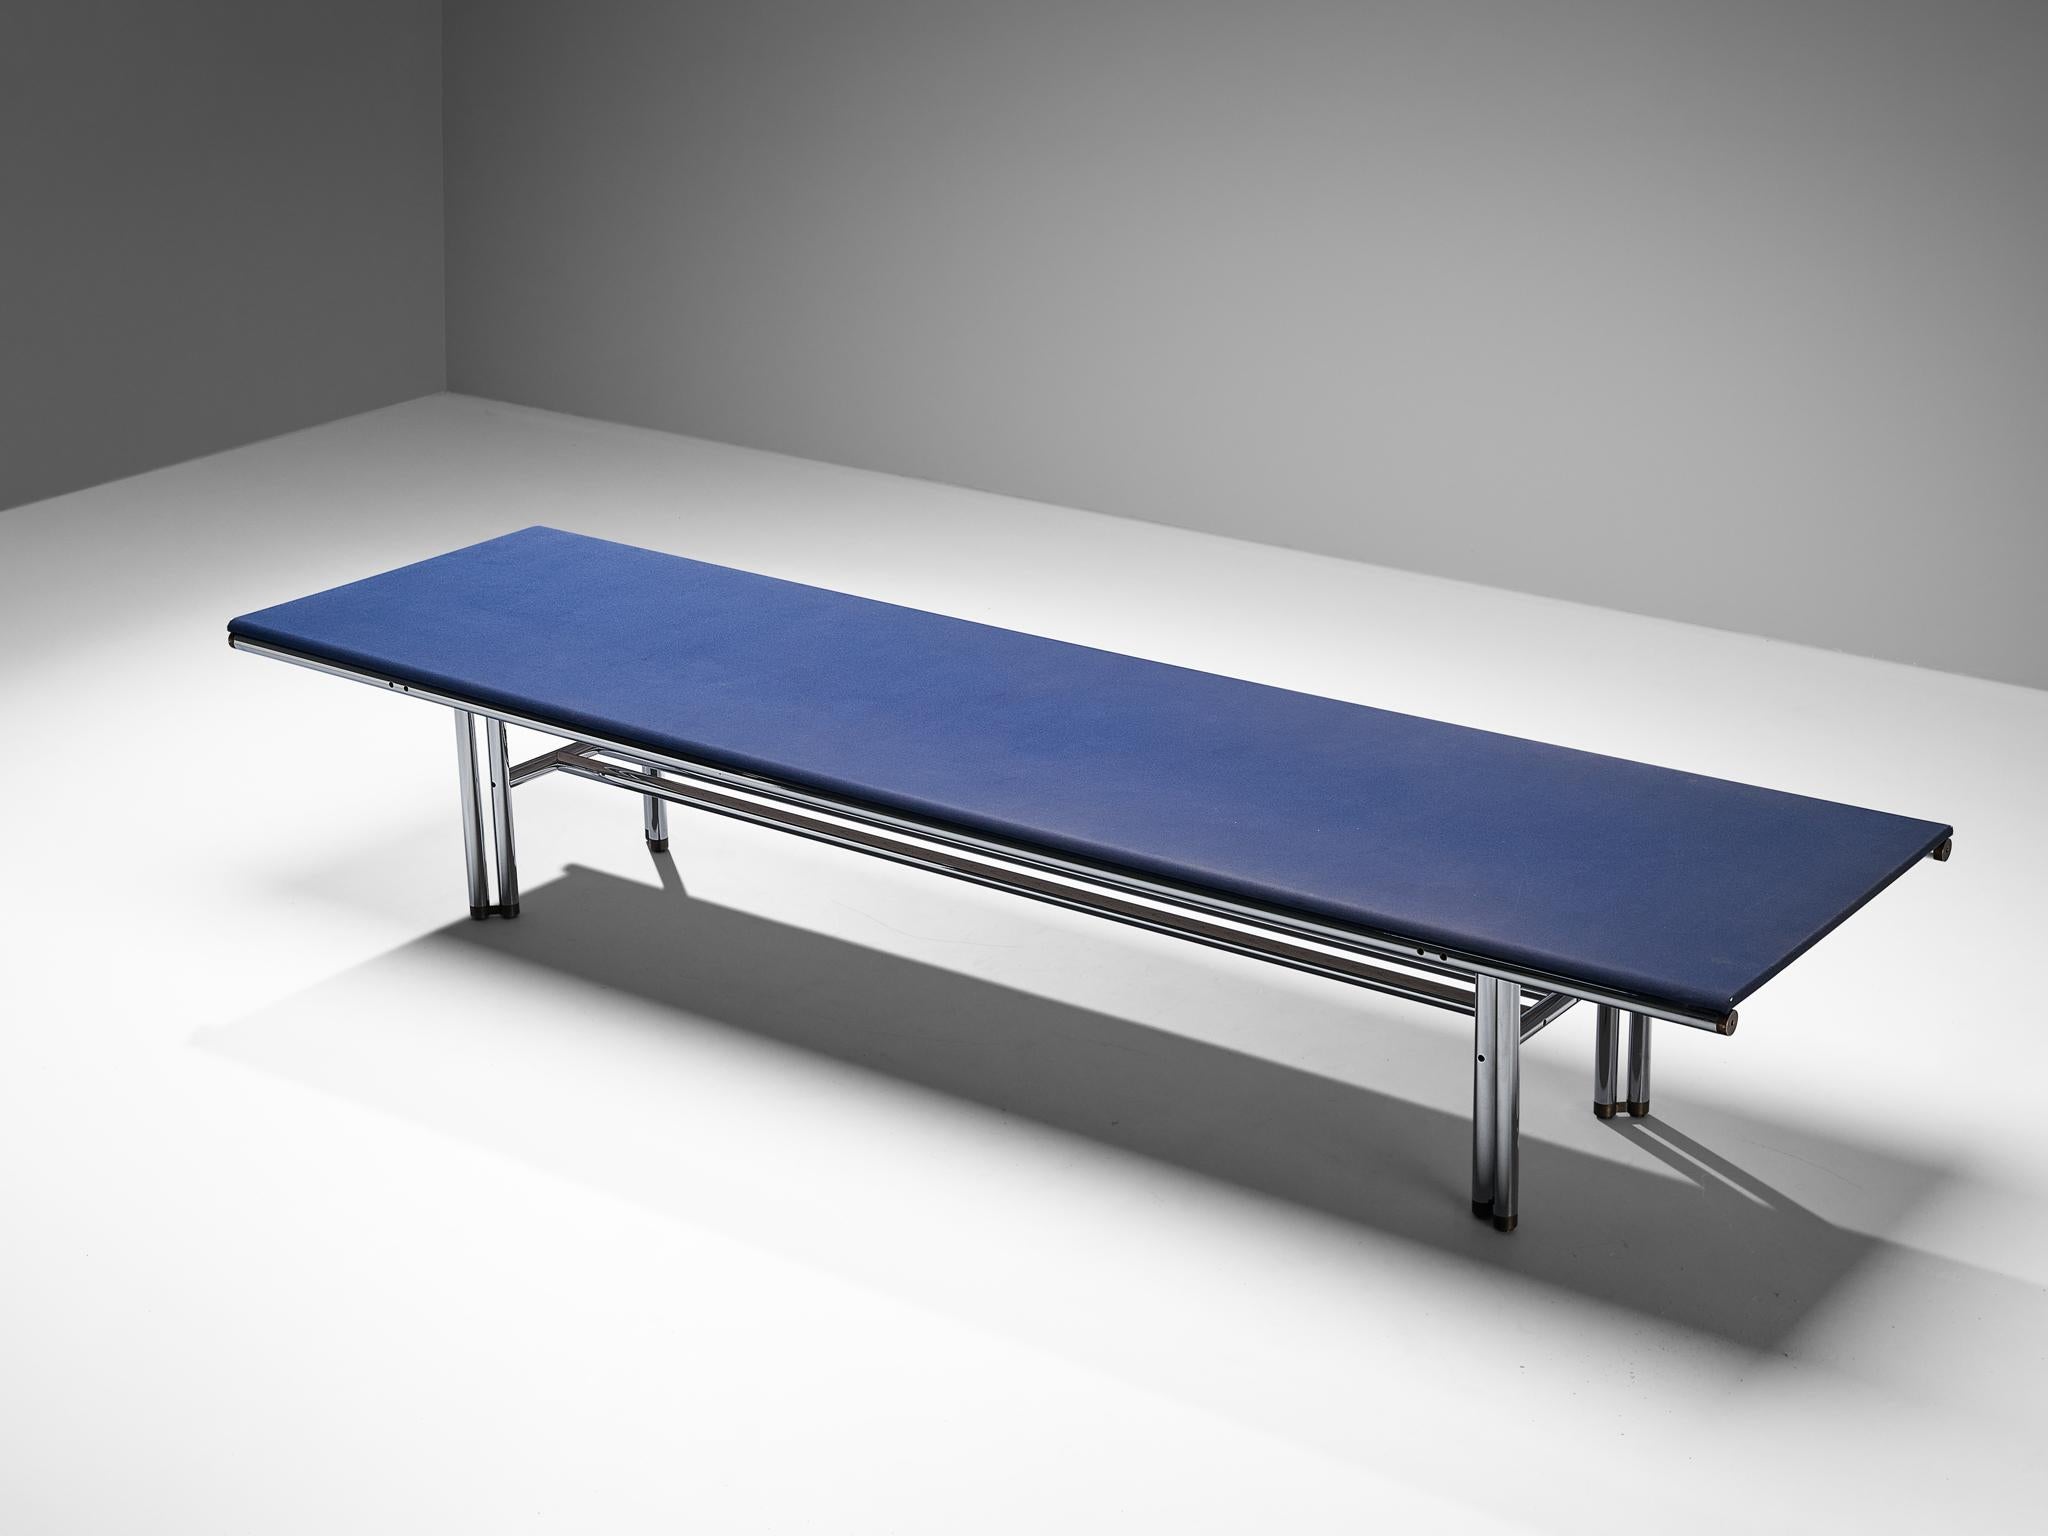 Carlo Scarpa and Hiroyuki Toyoda for Simon Gavina, conference table, fabric top, chromed steel, Italy, design 1973

Elegant conference table was initially designed by Carlo Scarpa in 1973. However, it never went in to production. After Scarpa’s